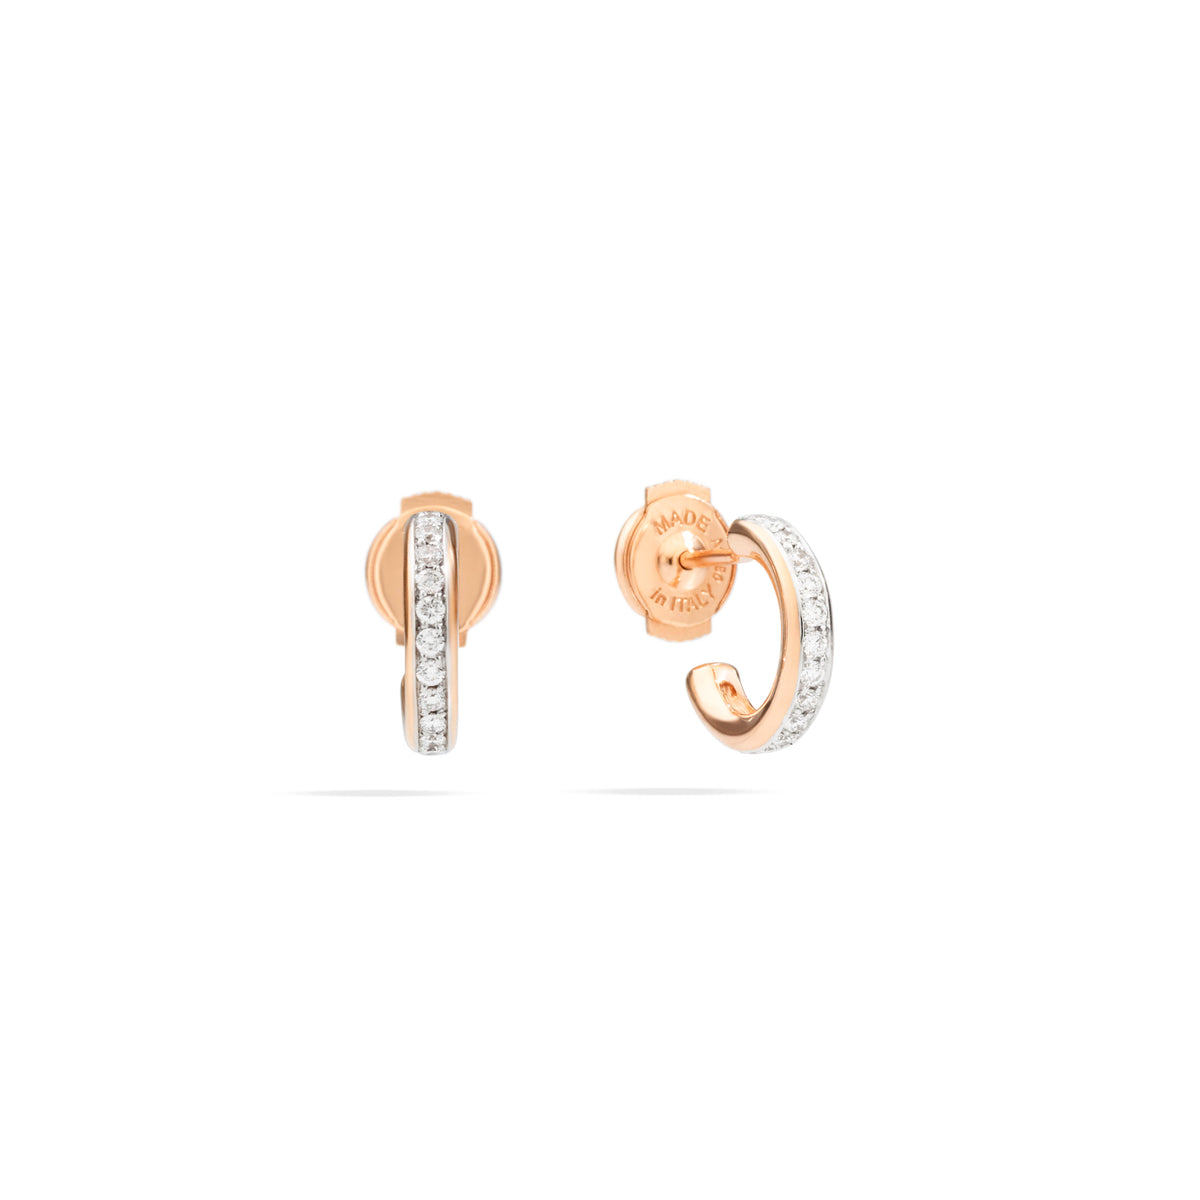 Iconica Earrings in 18k Rose Gold with Diamonds - Orsini Jewellers NZ